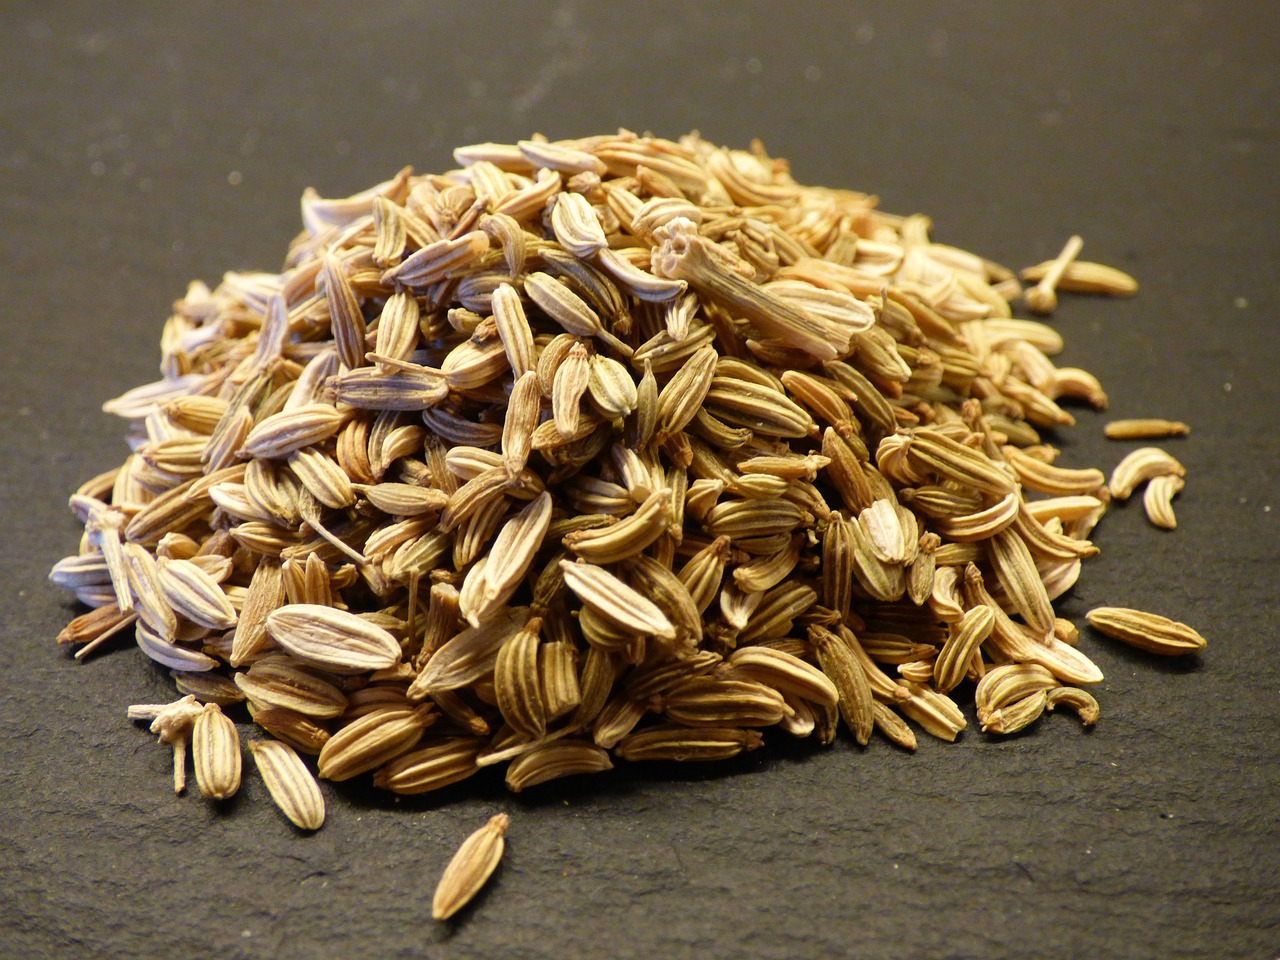 Fennel Substitute Spice